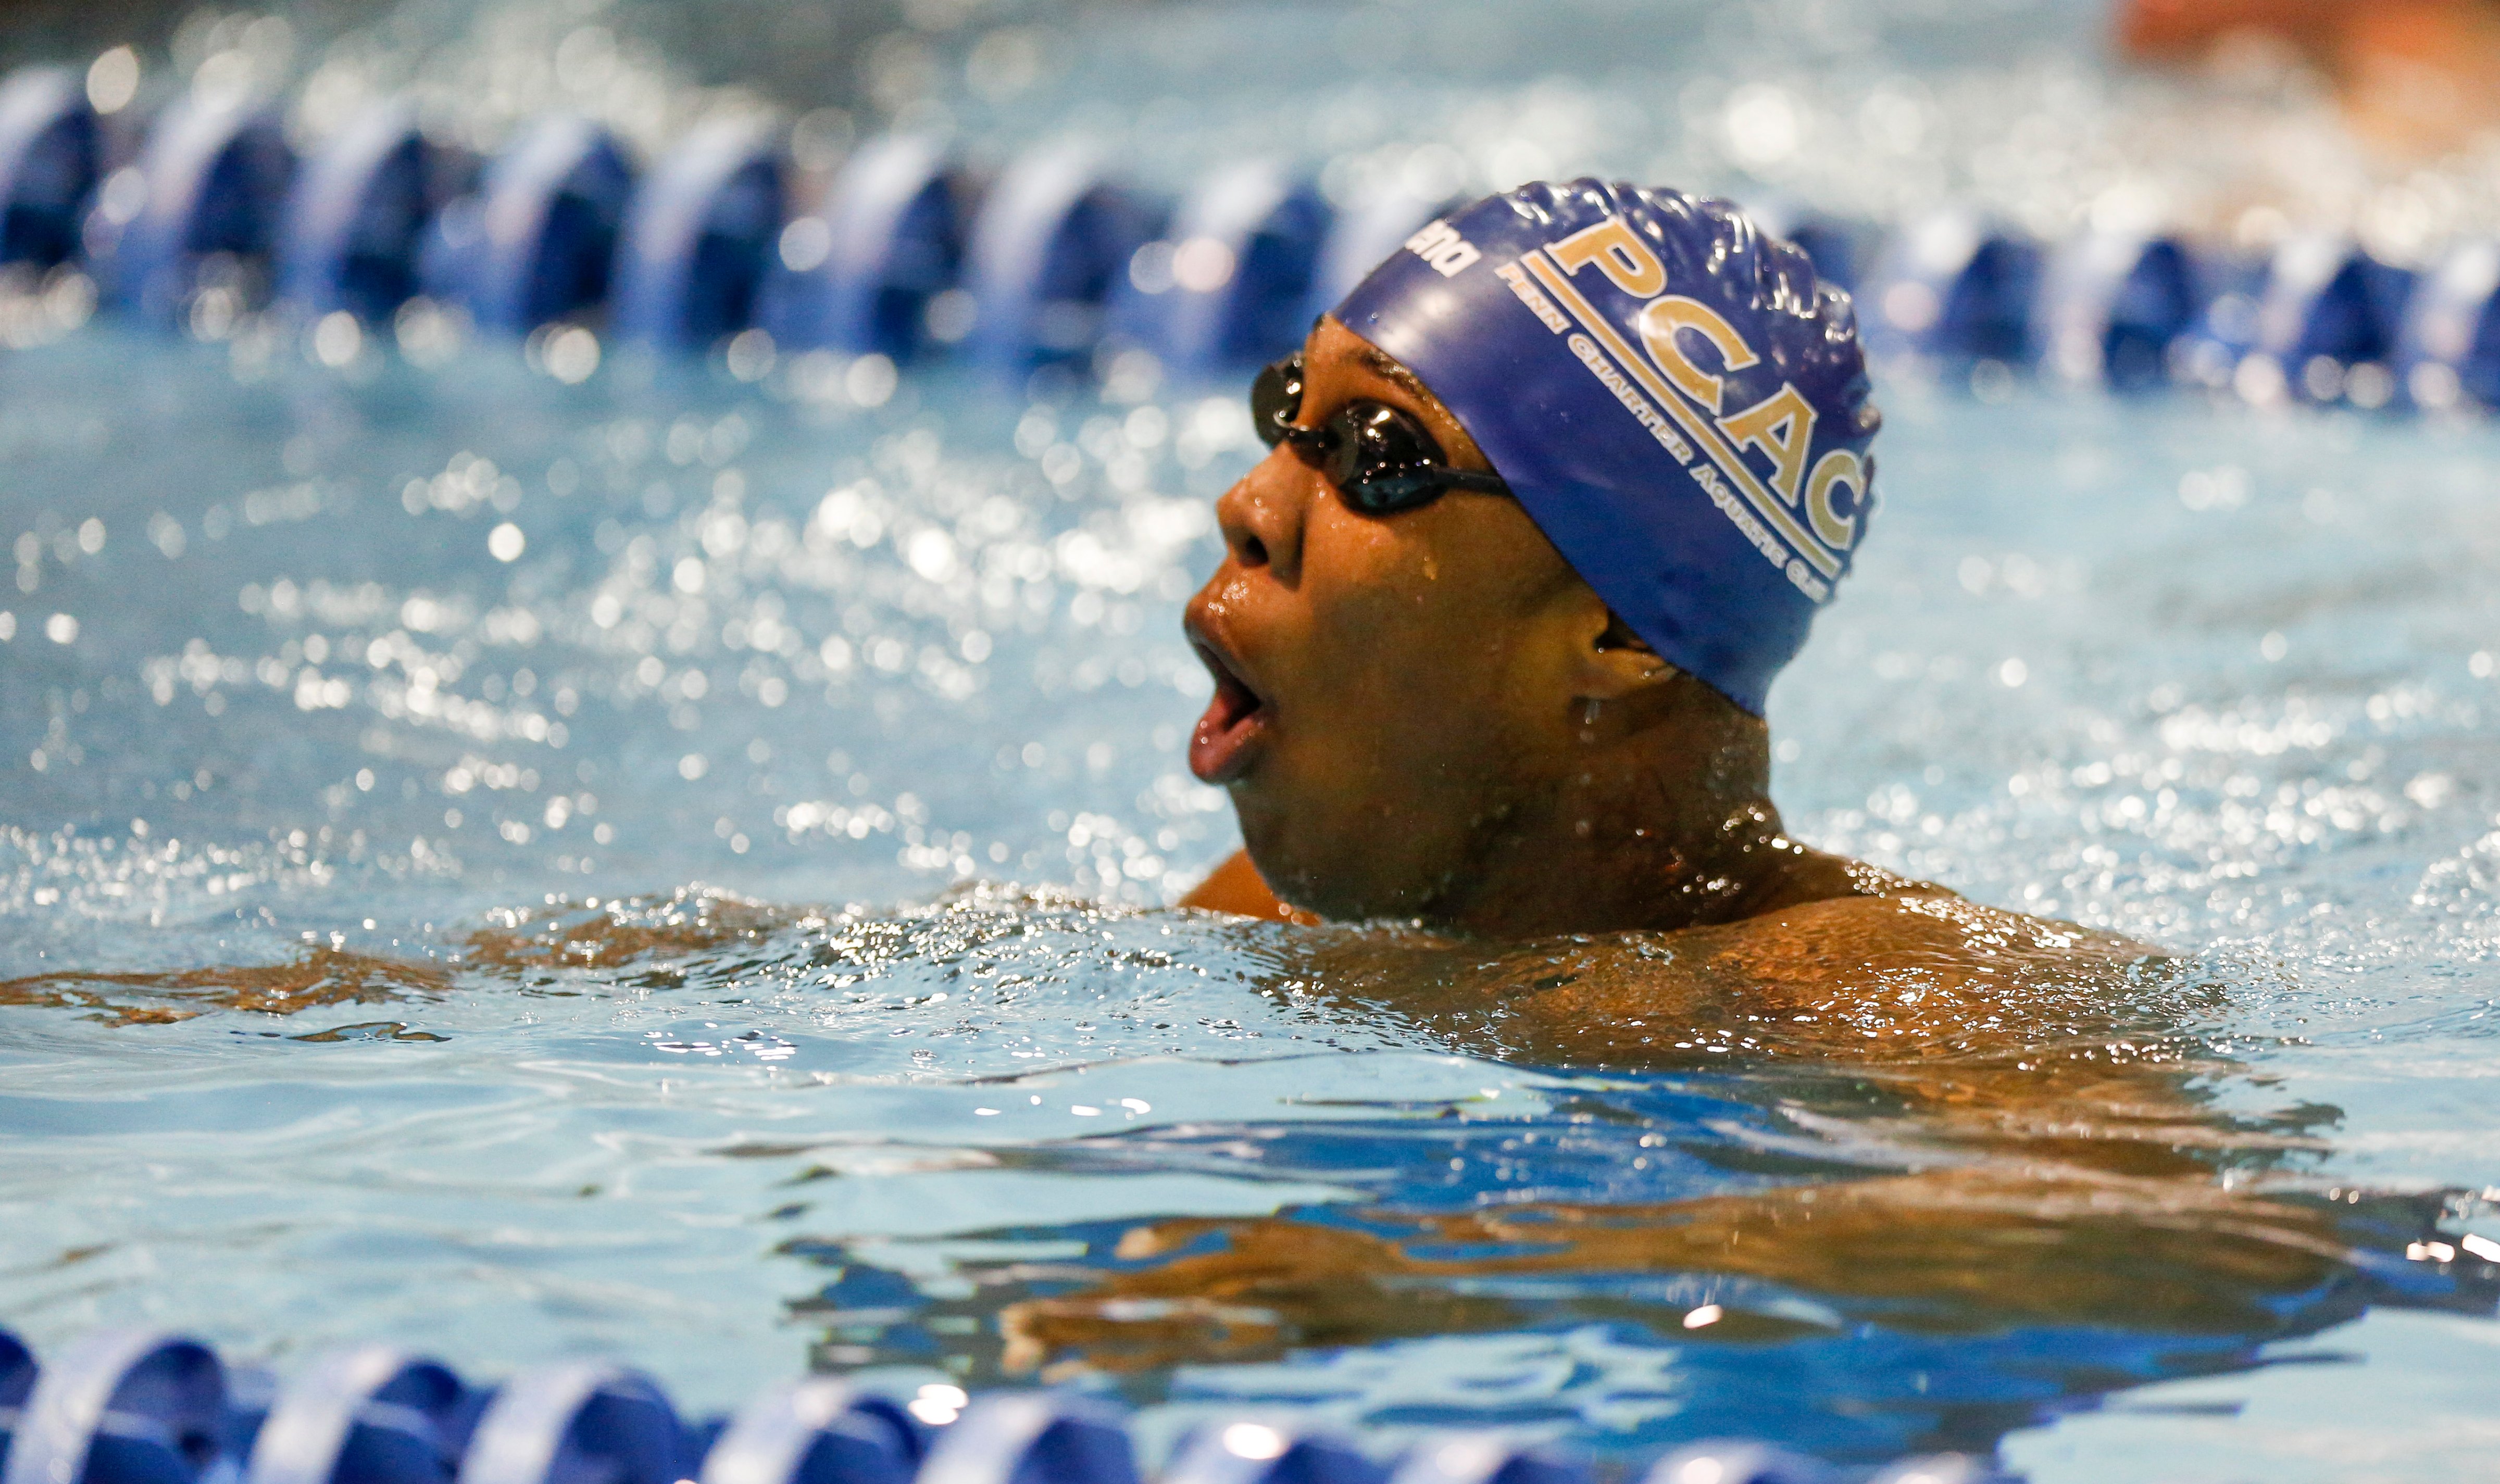 Reece Whitley at the Arena Pro Swim Series meet in Charlotte, N.C., on May 15, 2015. (Nell Redmond—AP)